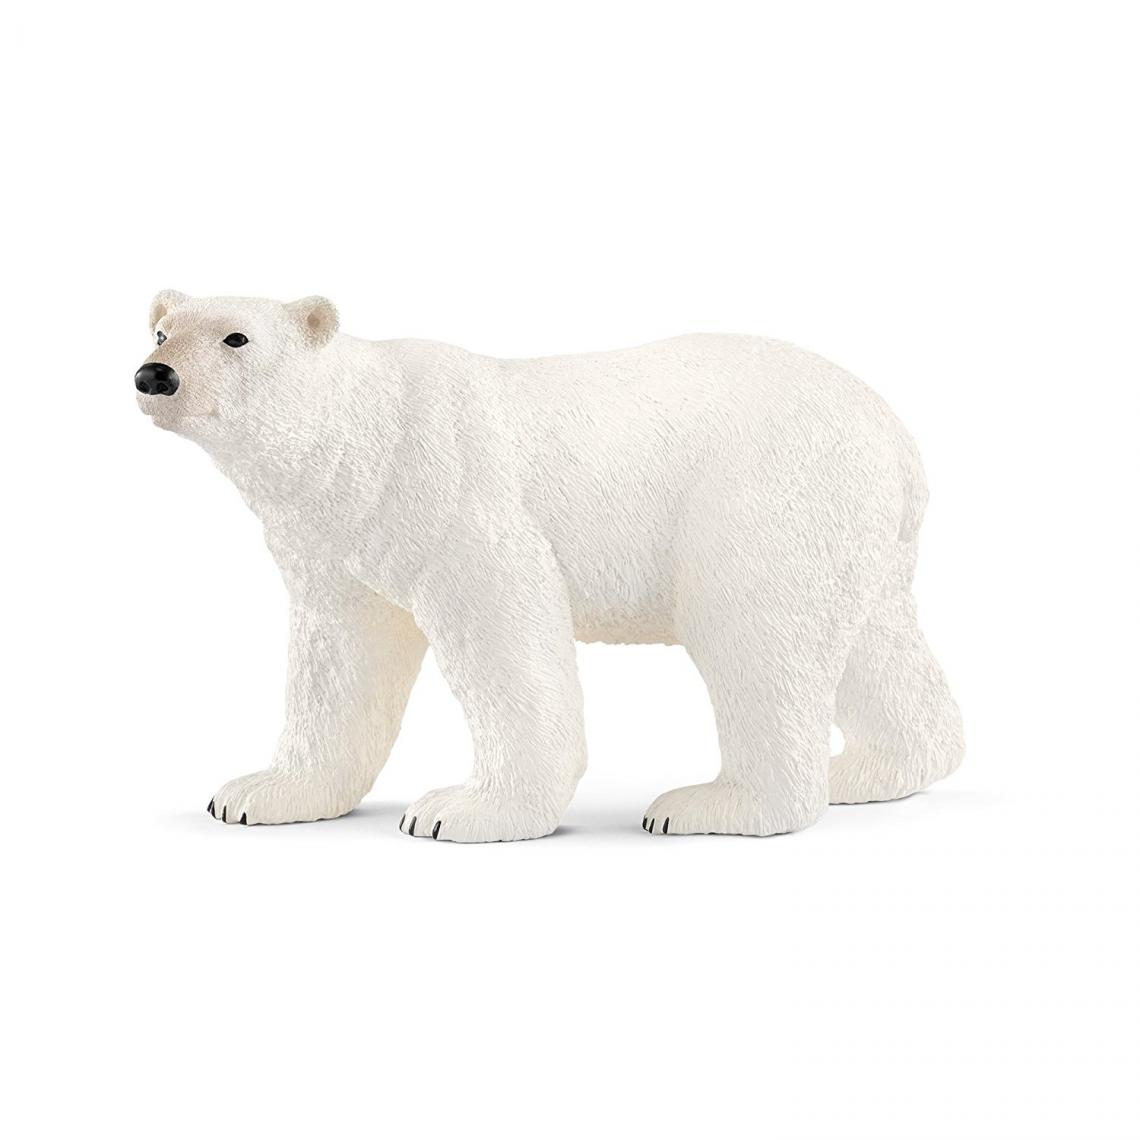 Schleich - Figurine Ours polaire - Animaux